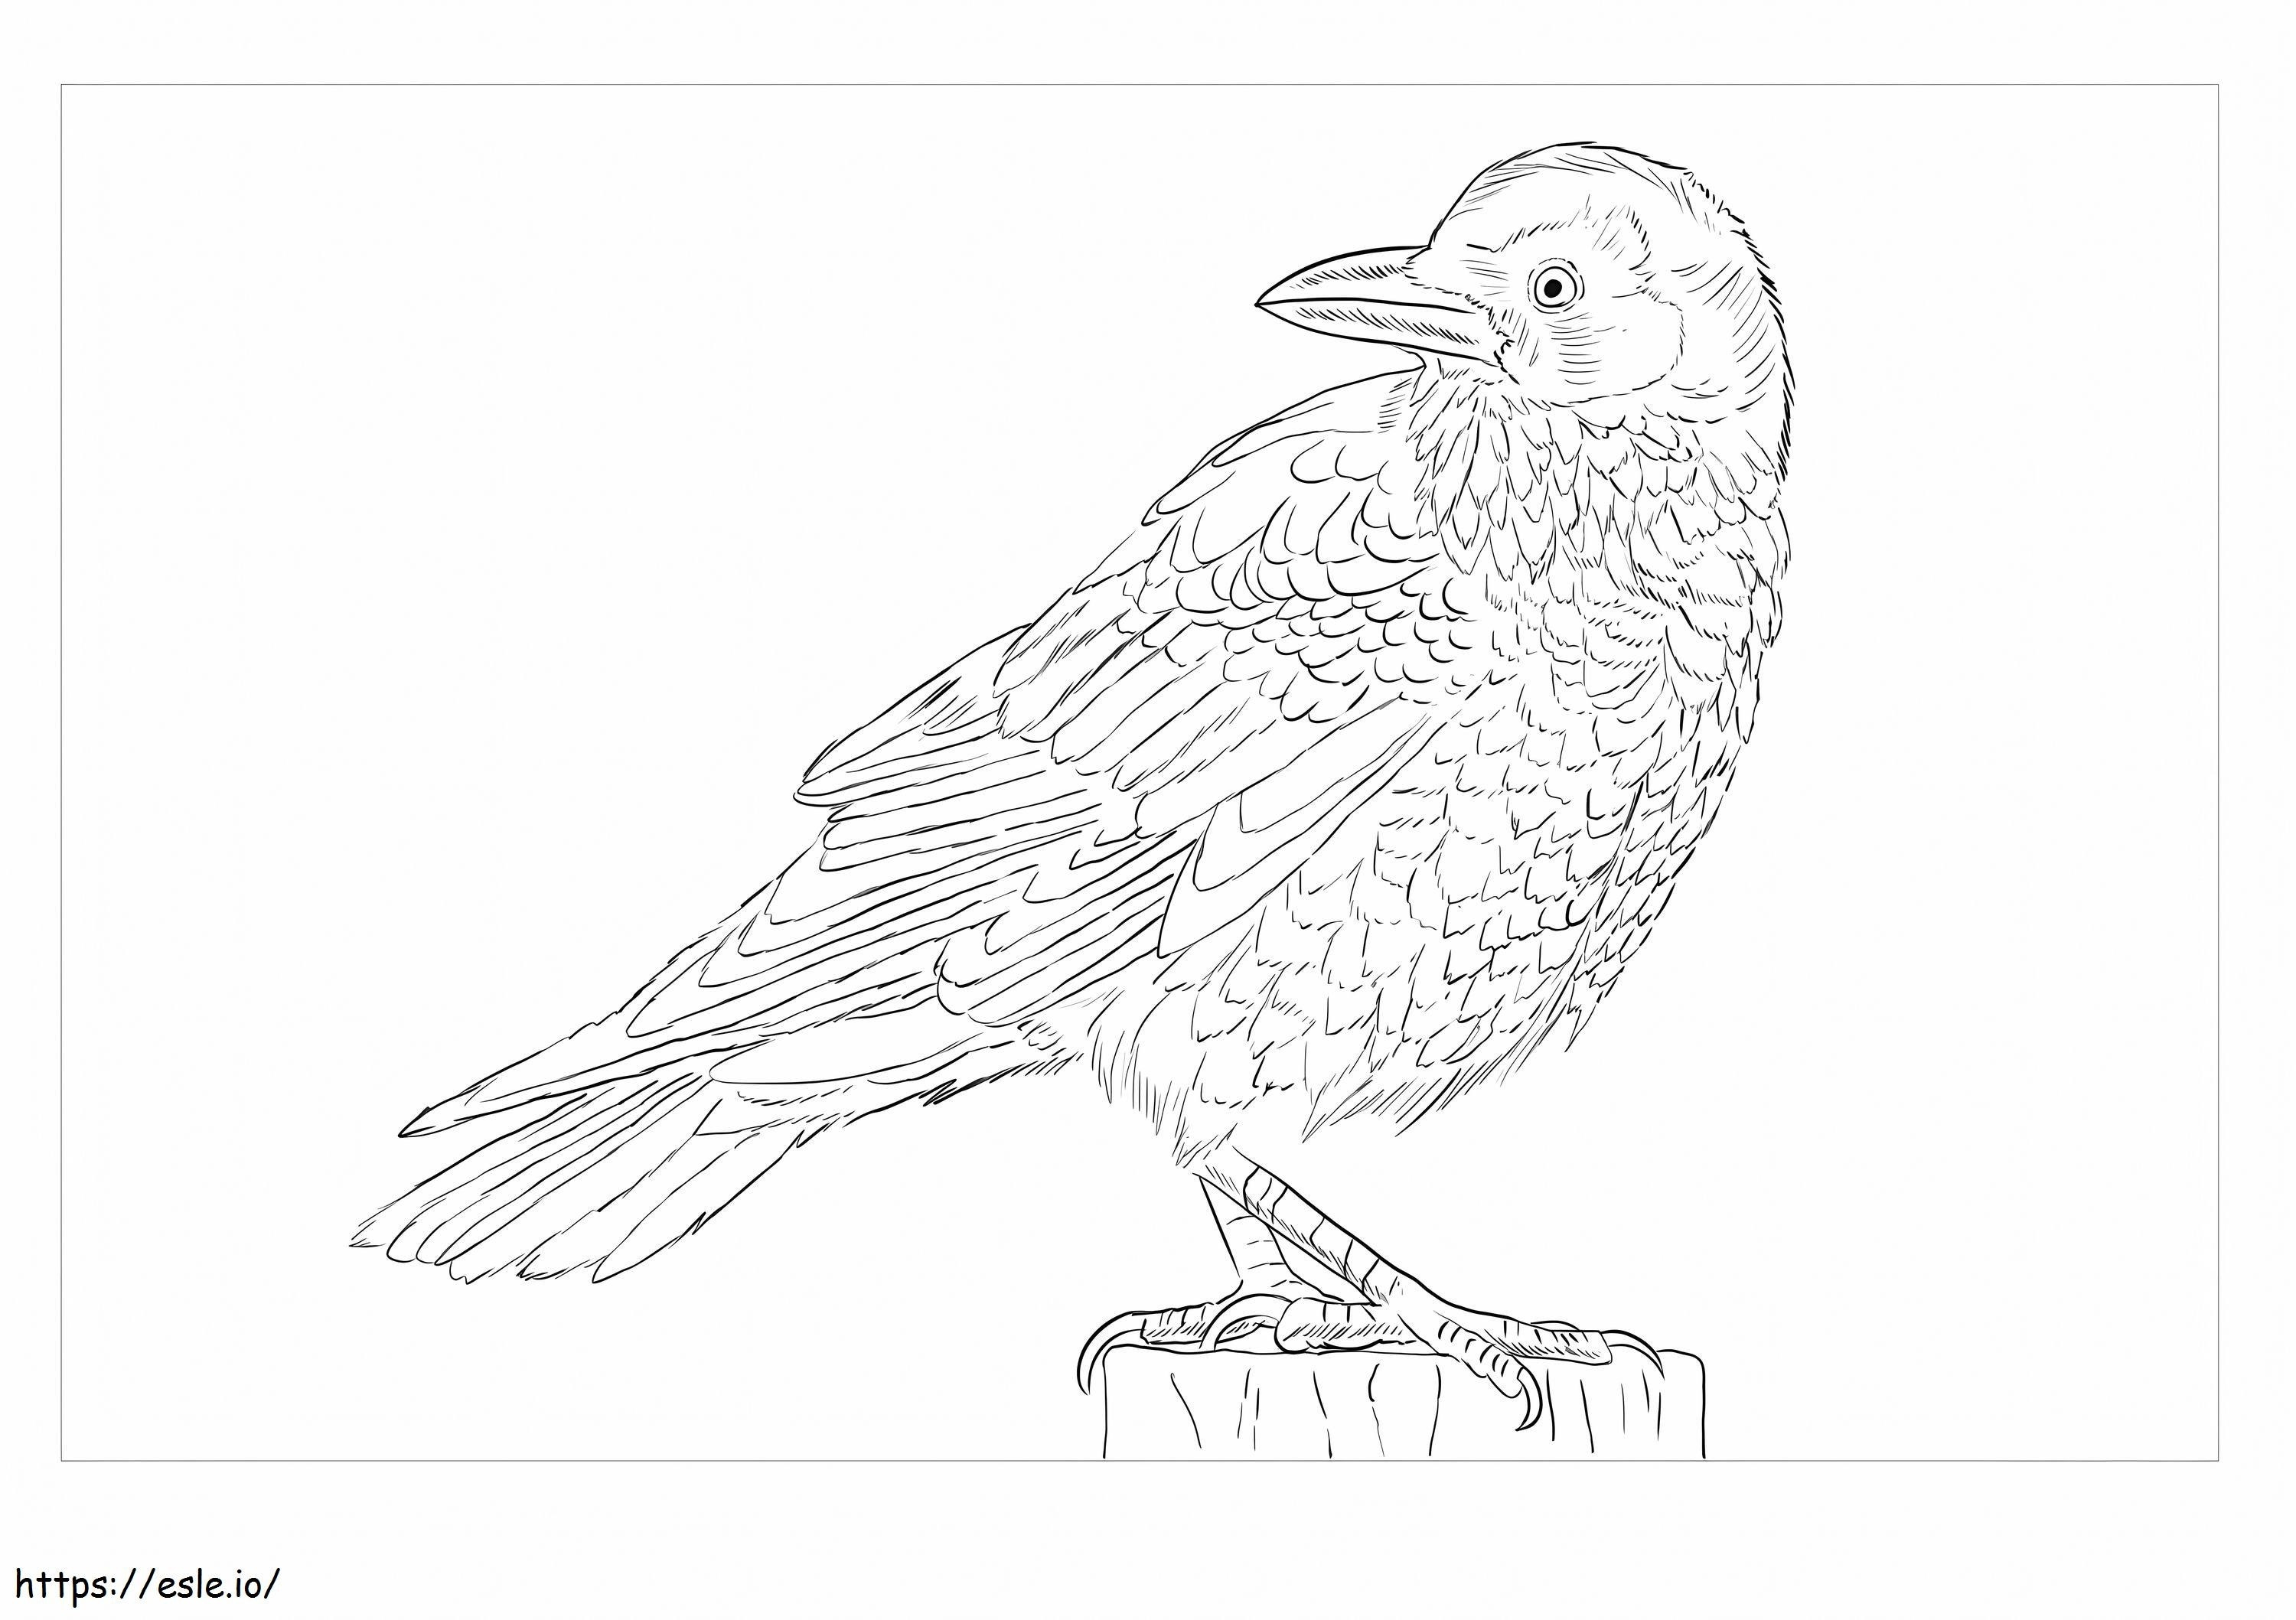 Raven Is For Adults coloring page